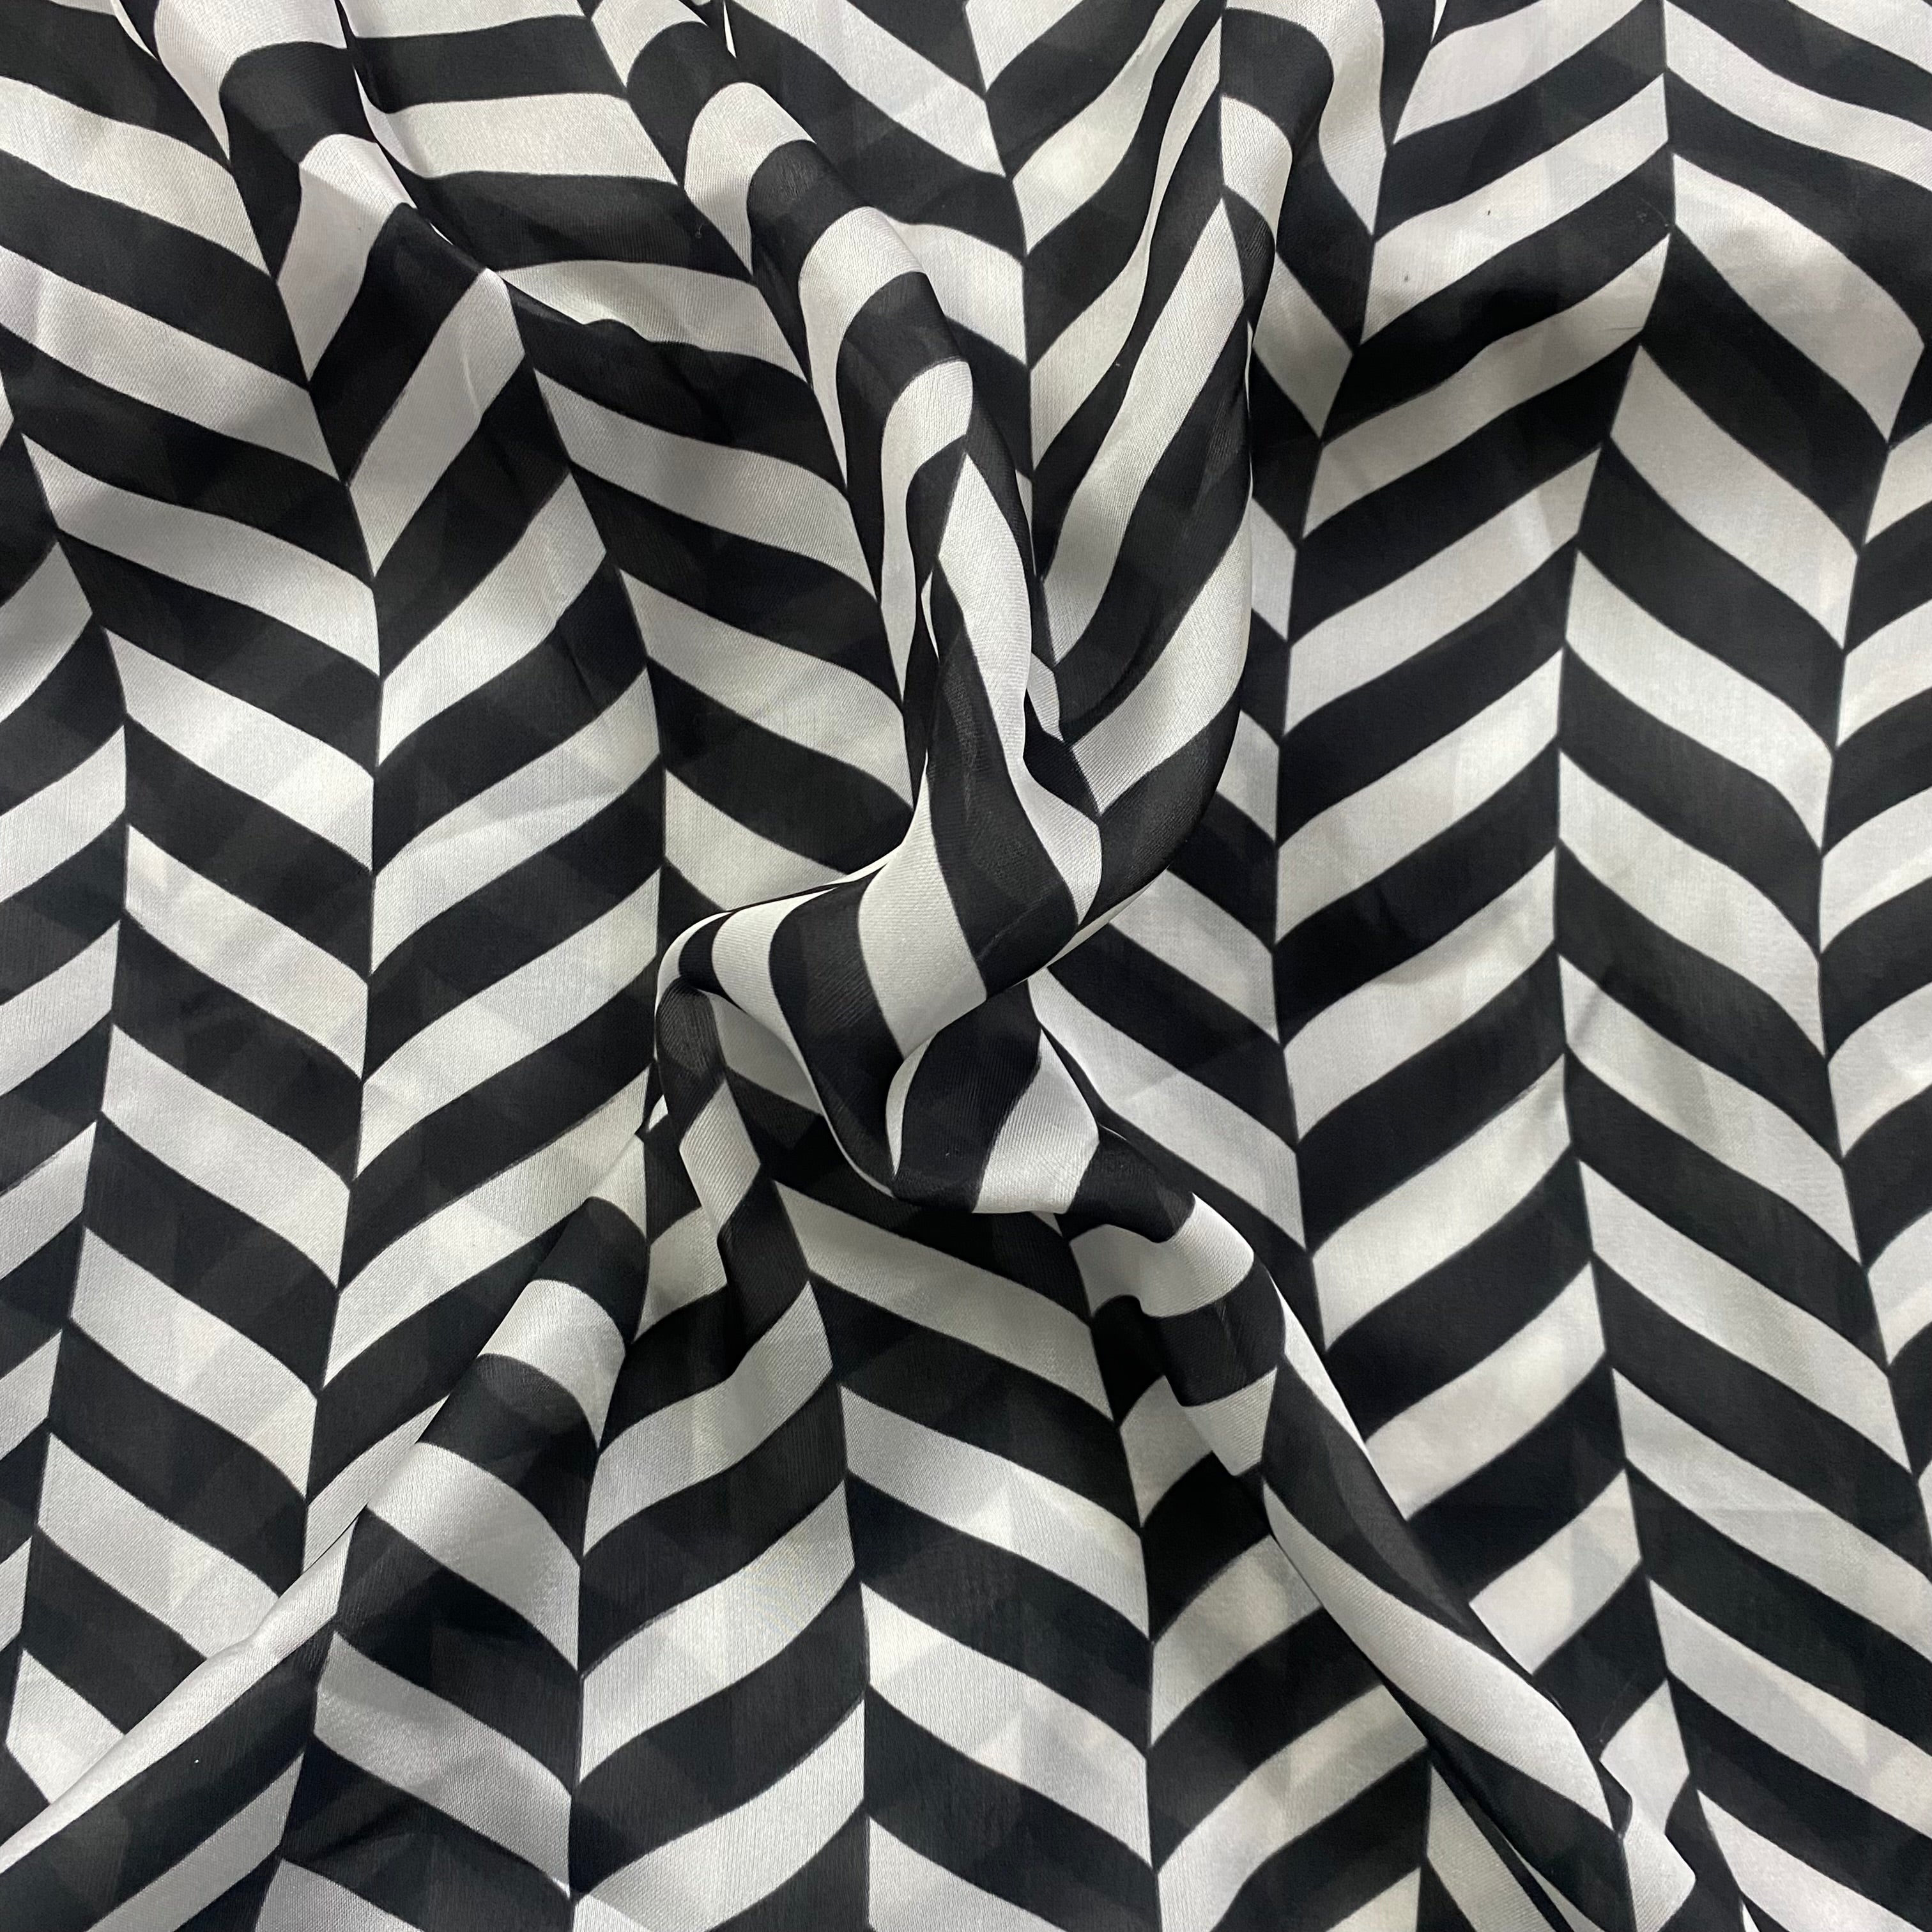 Black & white contrast abstract print on georgette satin fabric per meter